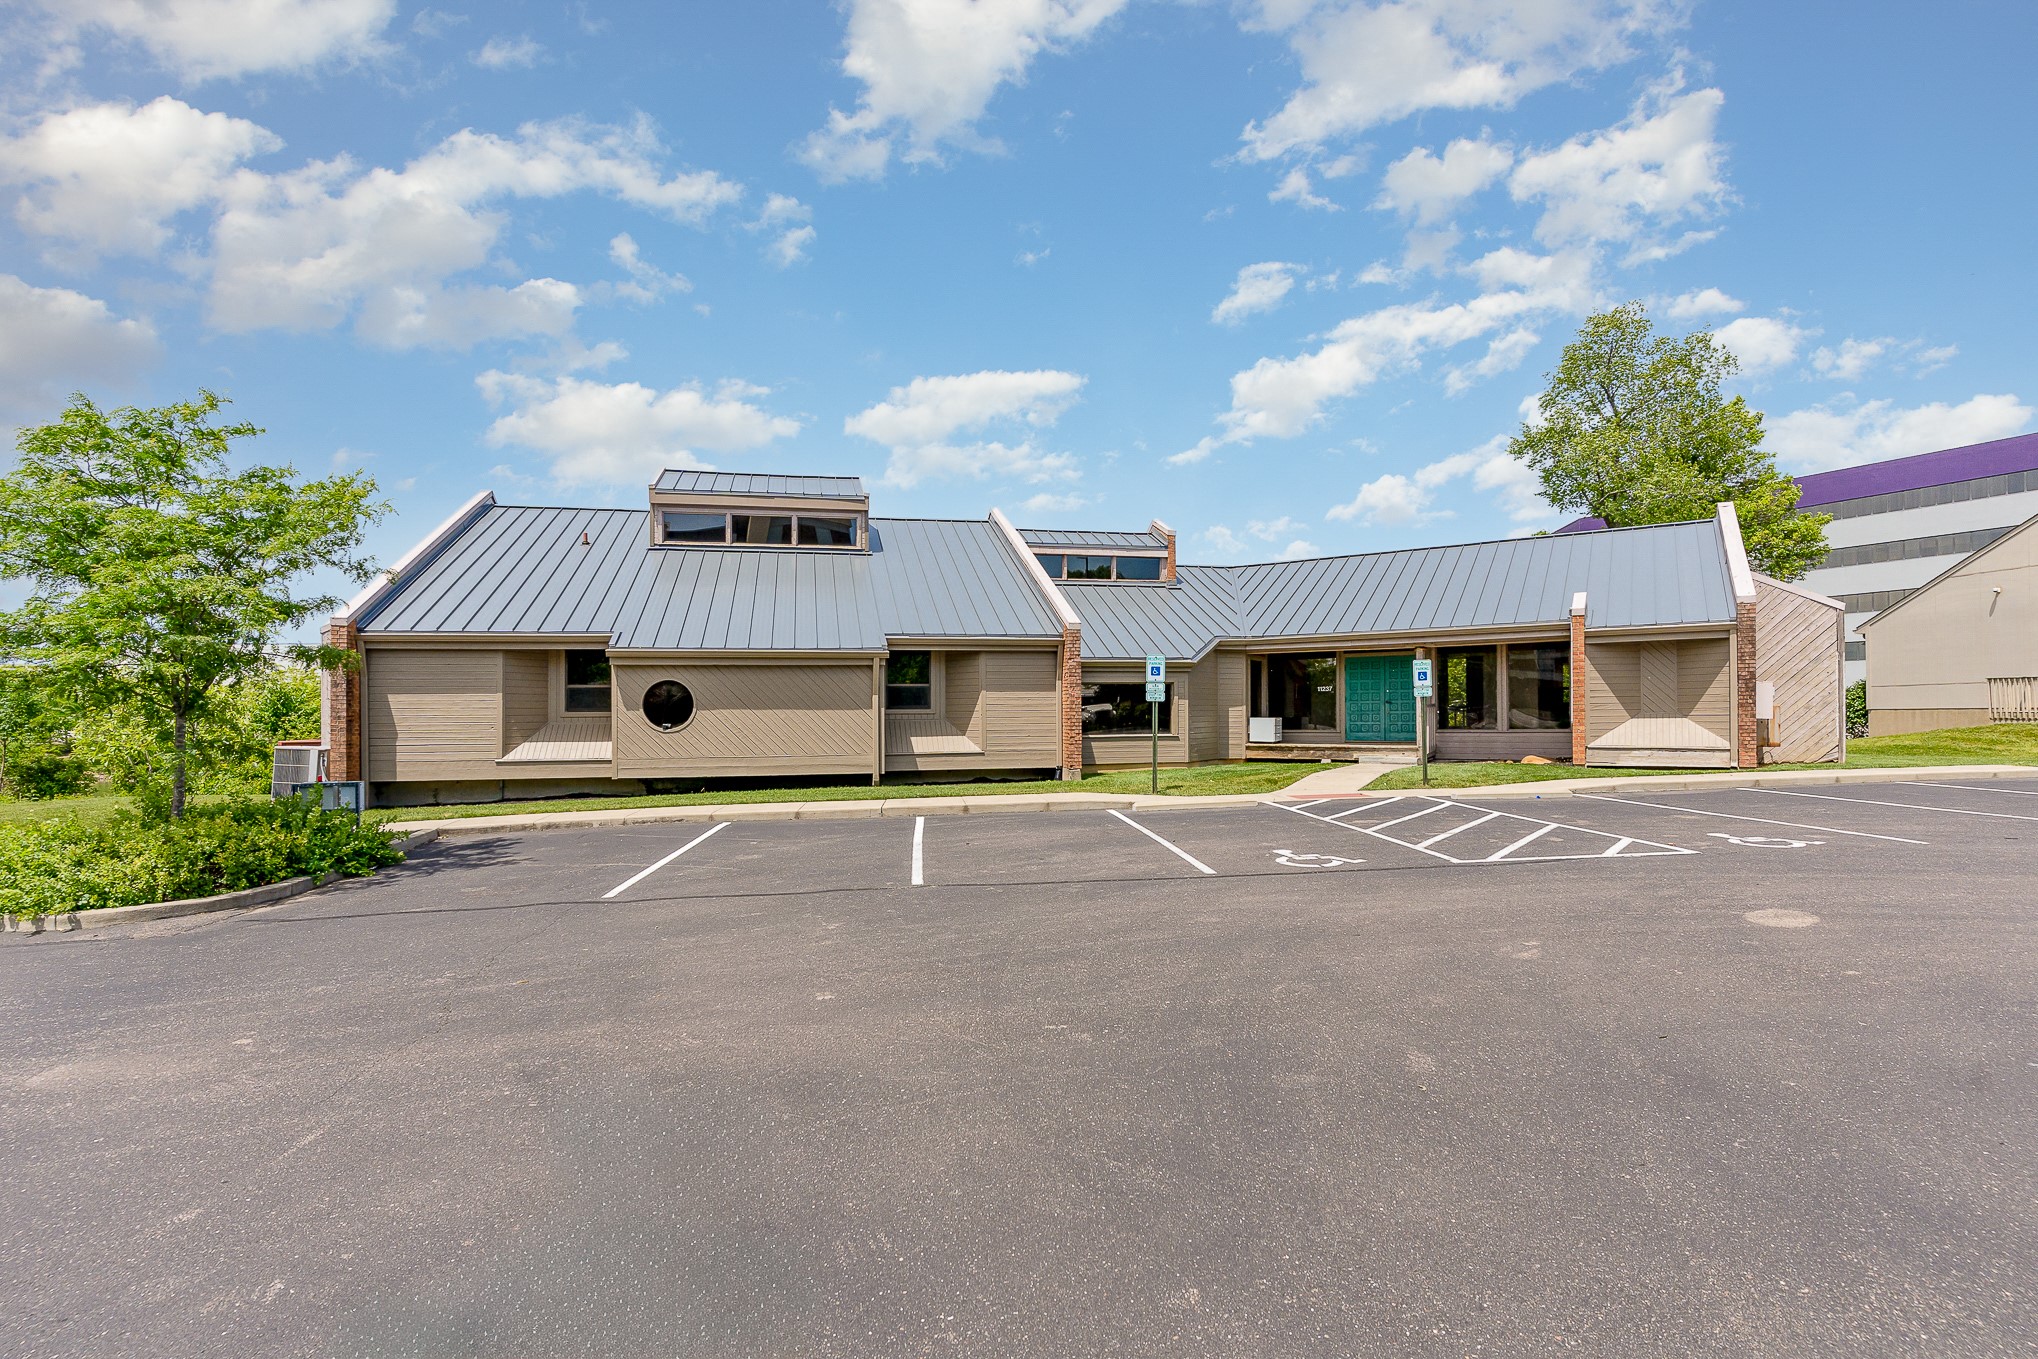 Photo of commercial space at 11237 Cornell Park Dr in Cincinnati